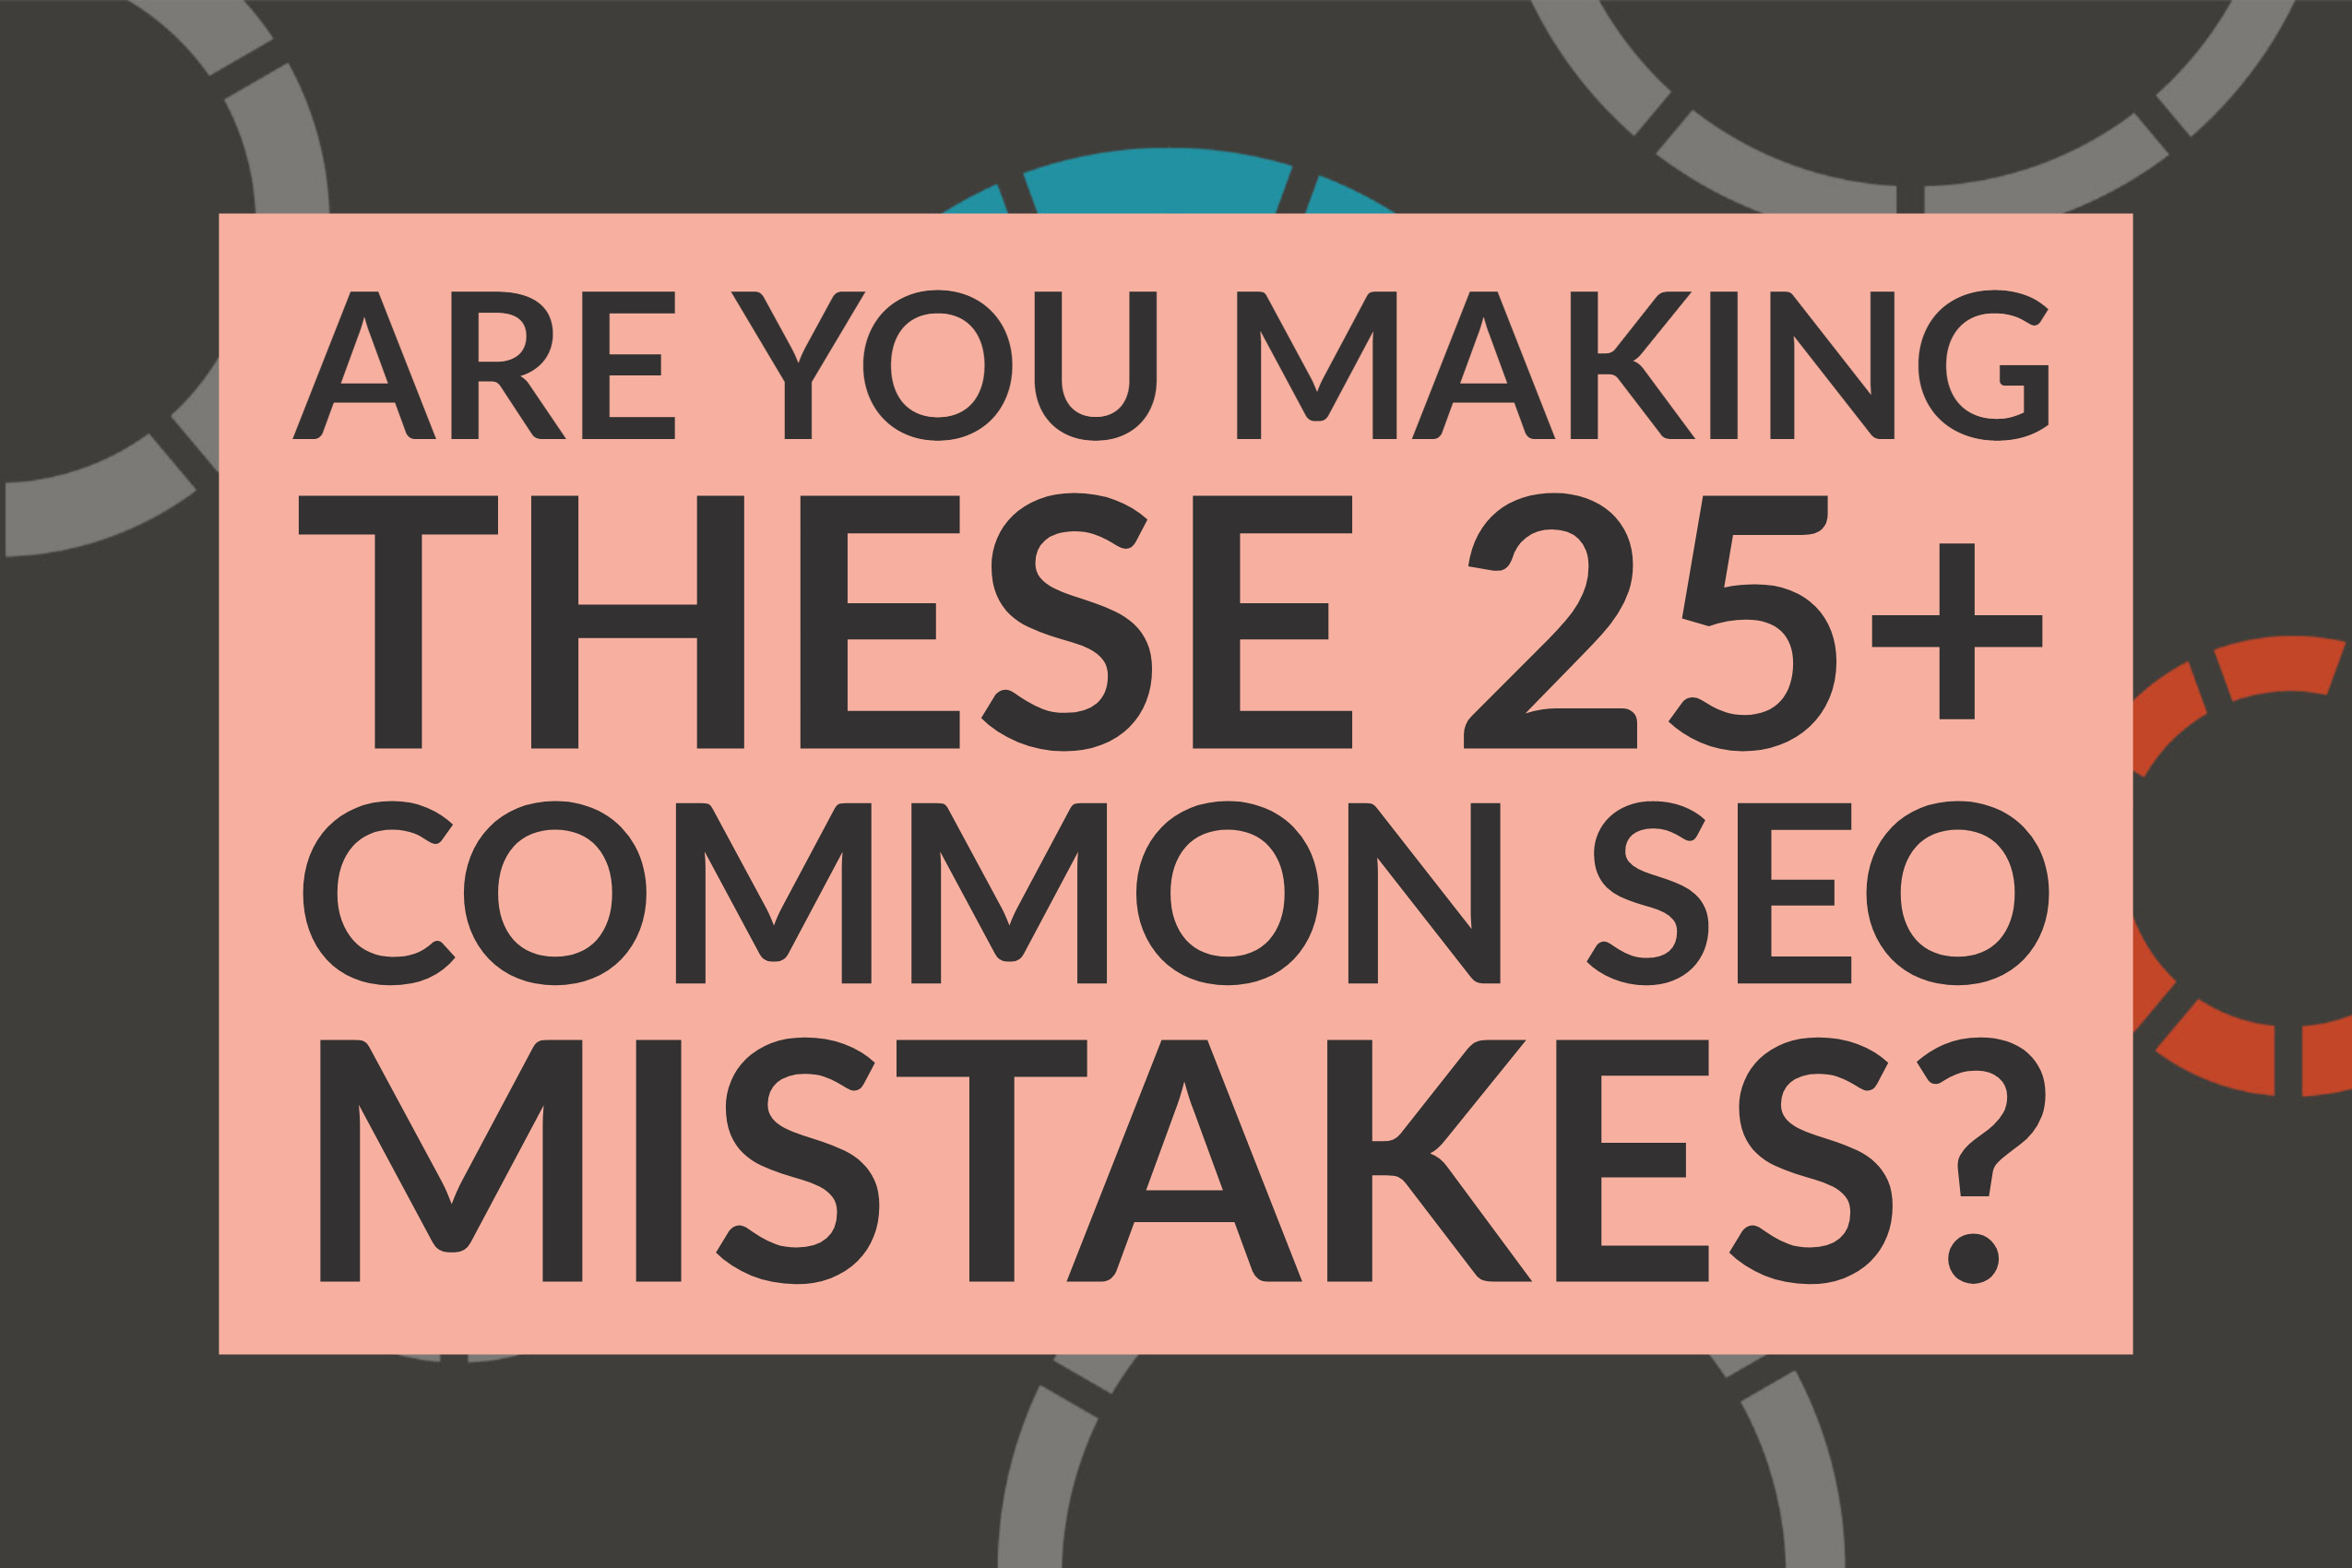 Are You Making These 25+ Common SEO Mistakes?